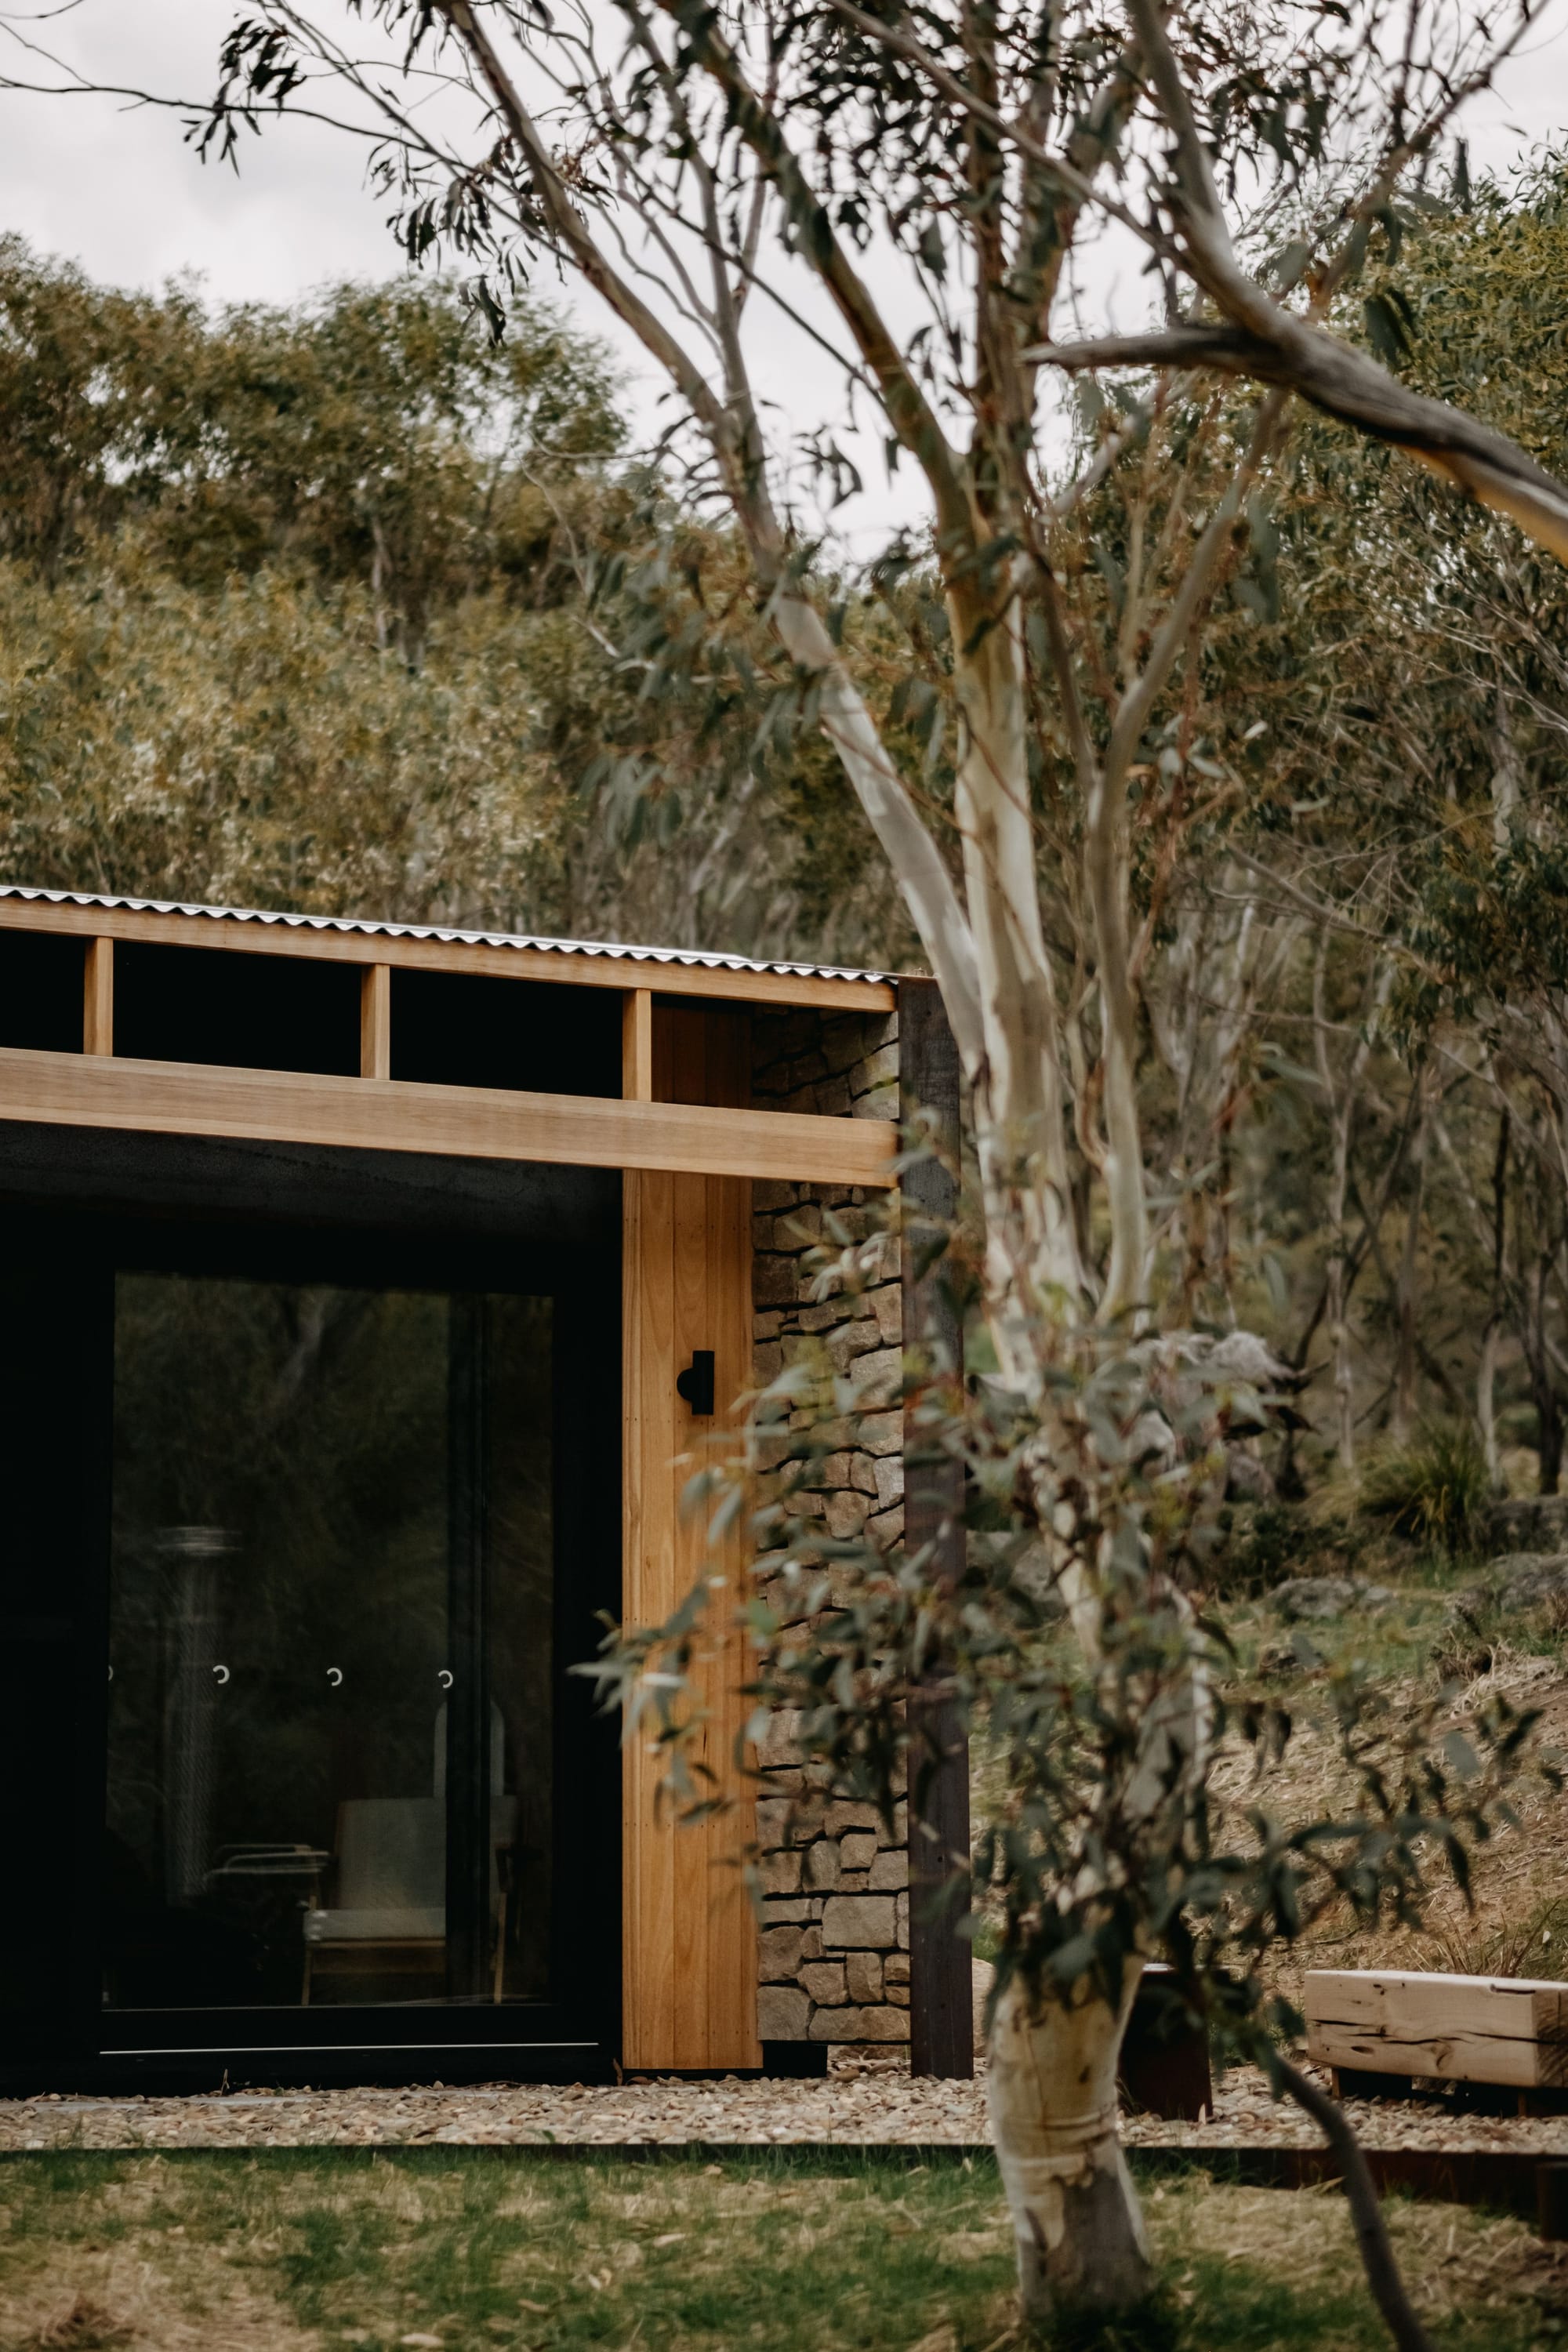 Crafters Eco-Cabins. Image copyright of Crafters. Eucalyptus tree in foreground, timber clad cabin with stonework in background.